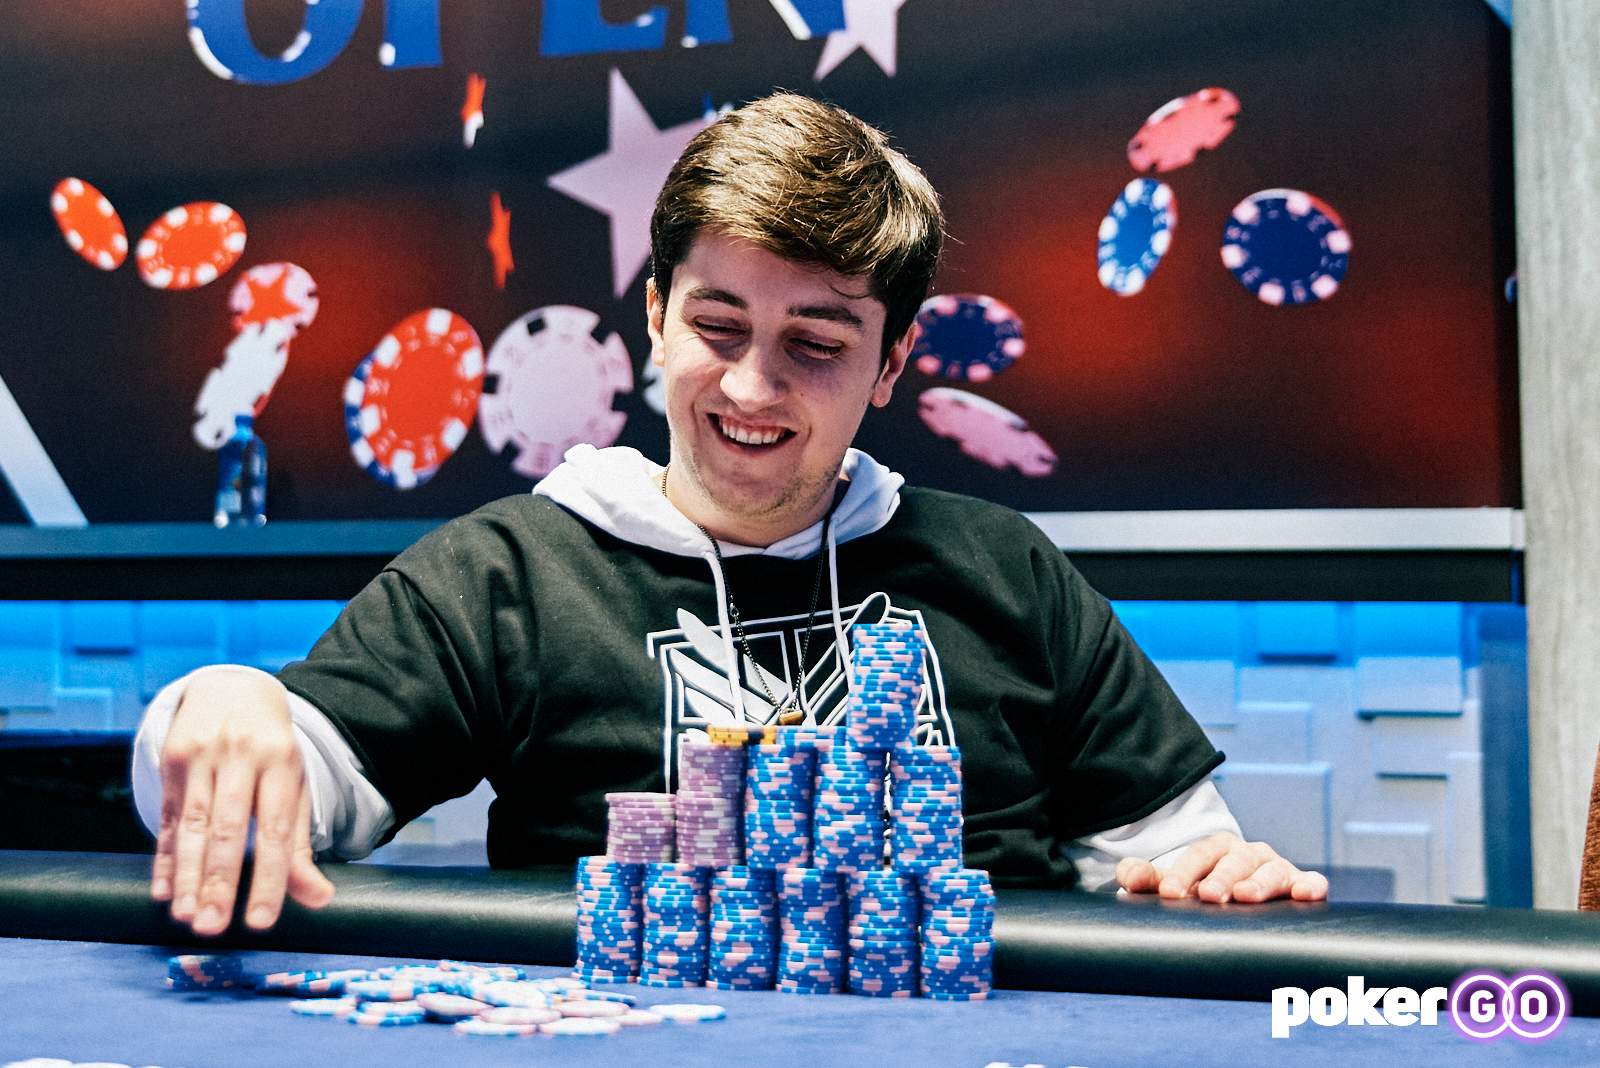 Ali Imsirovic Leads the Final Table of Event #9: $10,000 No-Limit Hold’em